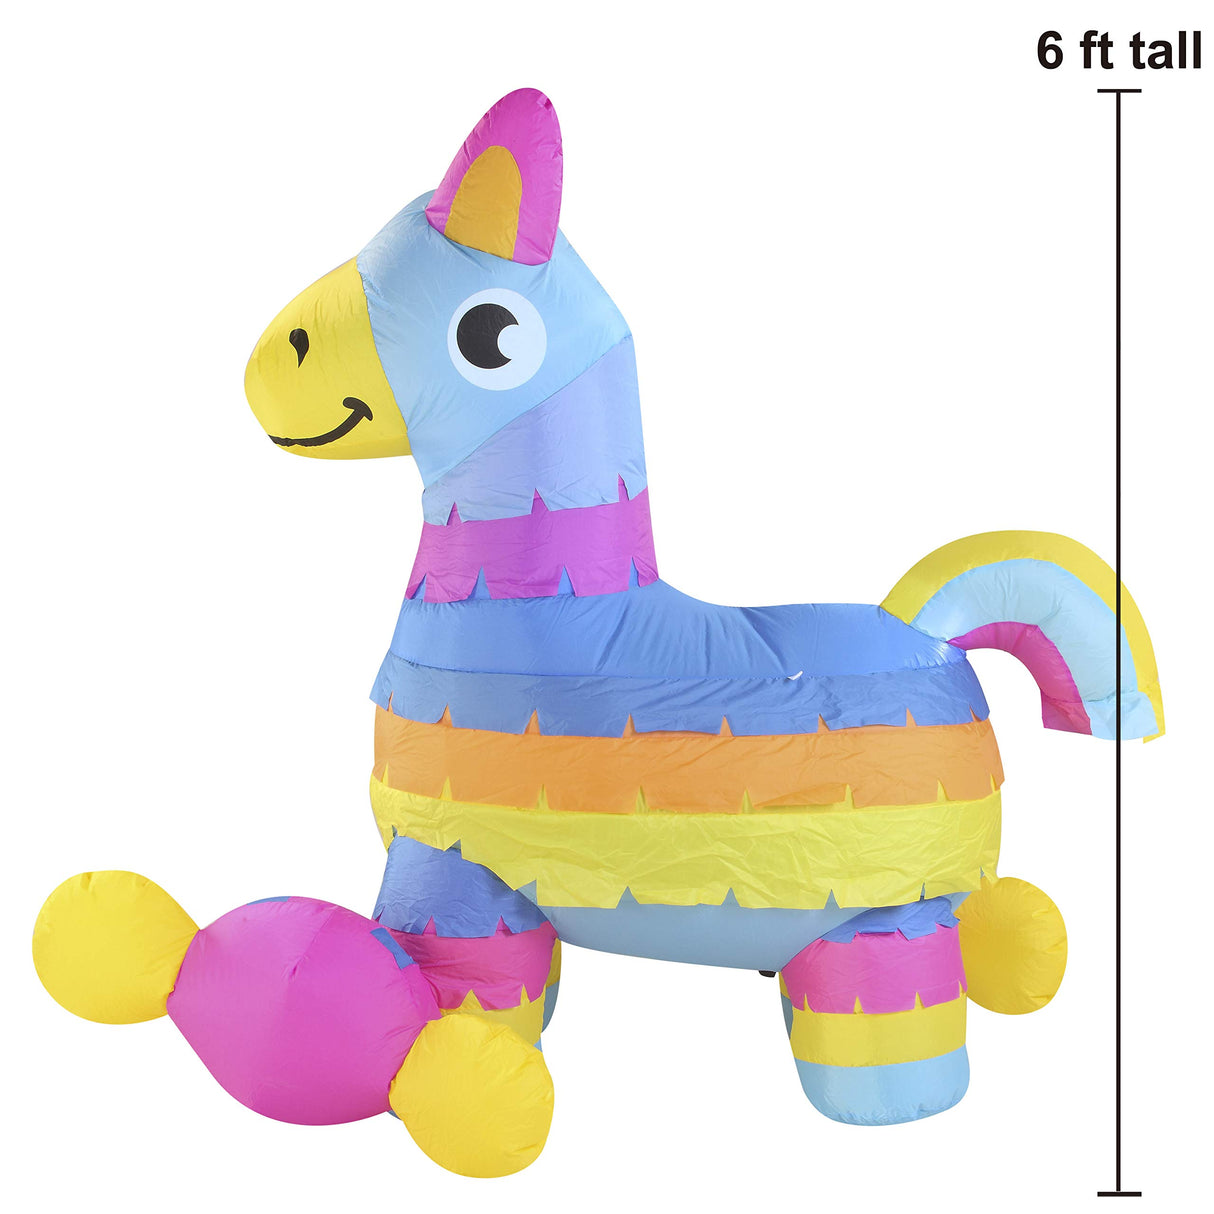 Joiedomi Cinco De Mayo Inflatable Decorations 6 FT Fiesta Pinata with Build-in LEDs Blow Up Inflatables for Cinco De Mayo Holiday Party Indoor, Outdoor, Yard, Garden, Lawn Spring Decor